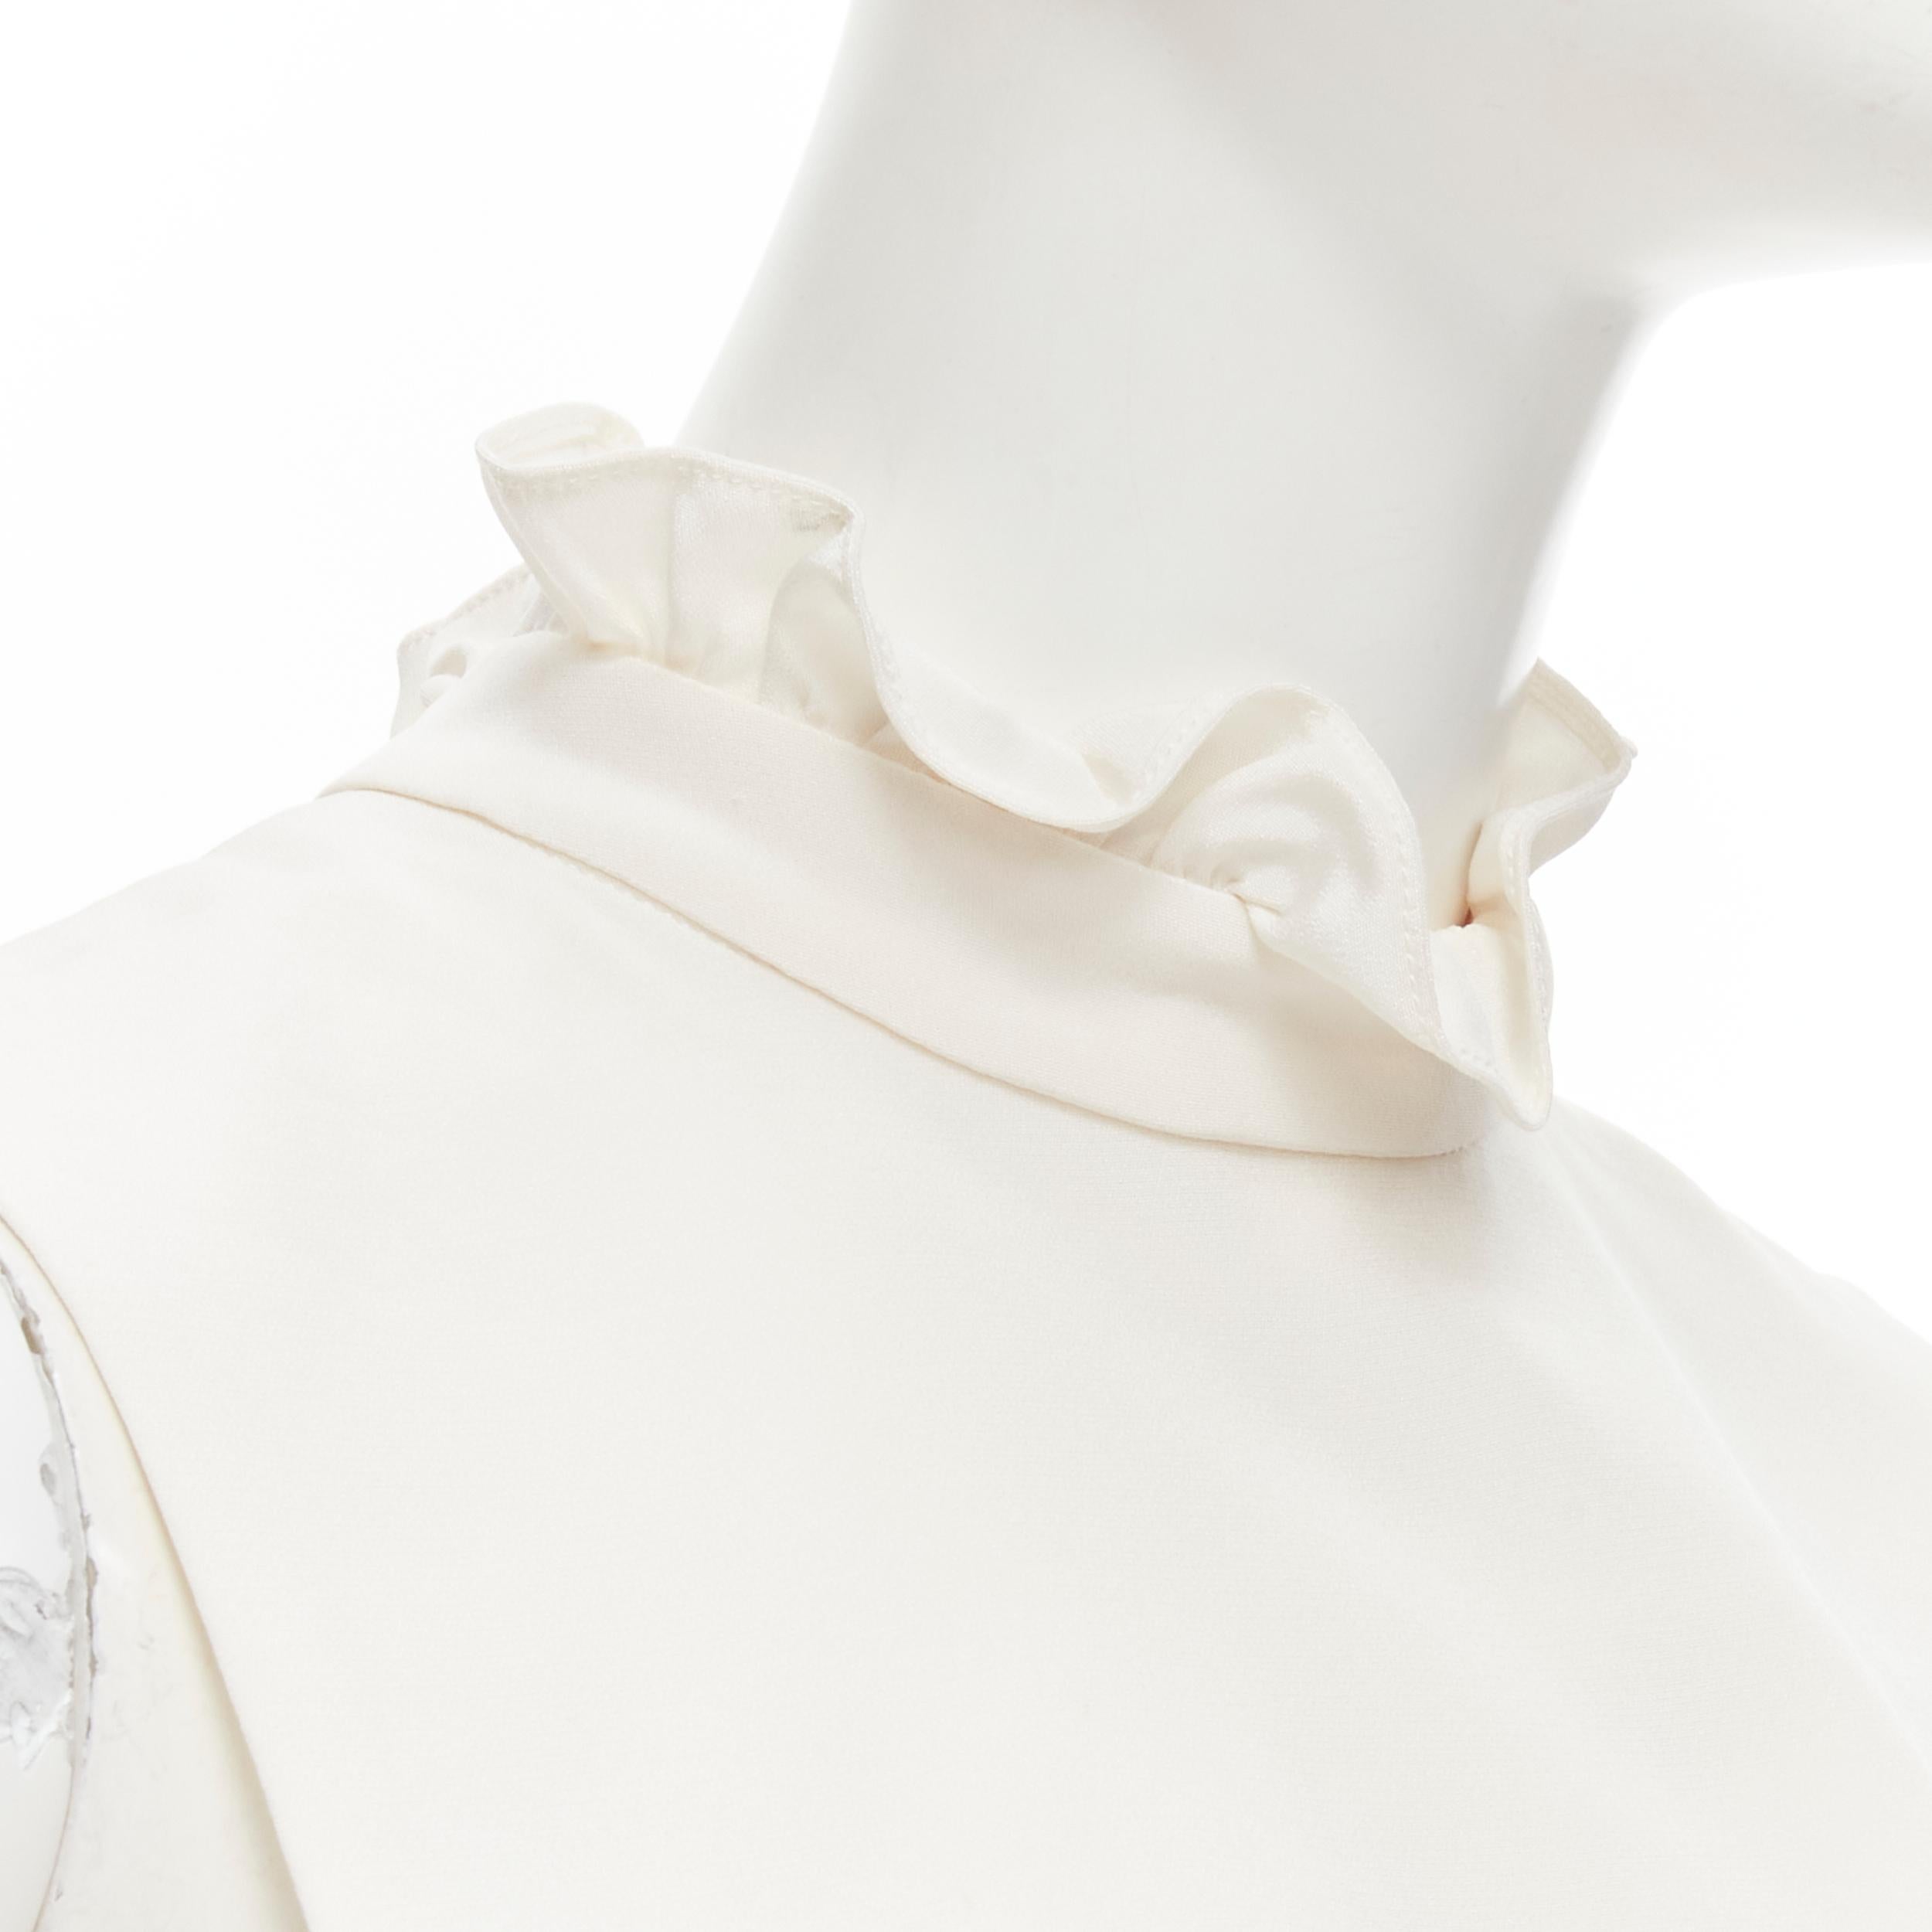 new ERDEM 2016 Inka white Cady silk ruffle collar bib One Size 
Reference: MELK/A00141 
Brand: Erdem 
Collection: PF2016 
Material: Silk 
Color: White 
Pattern: Solid 
Closure: Zip 
Extra Detail: Adjustable straps on side. 

CONDITION: 
Condition: